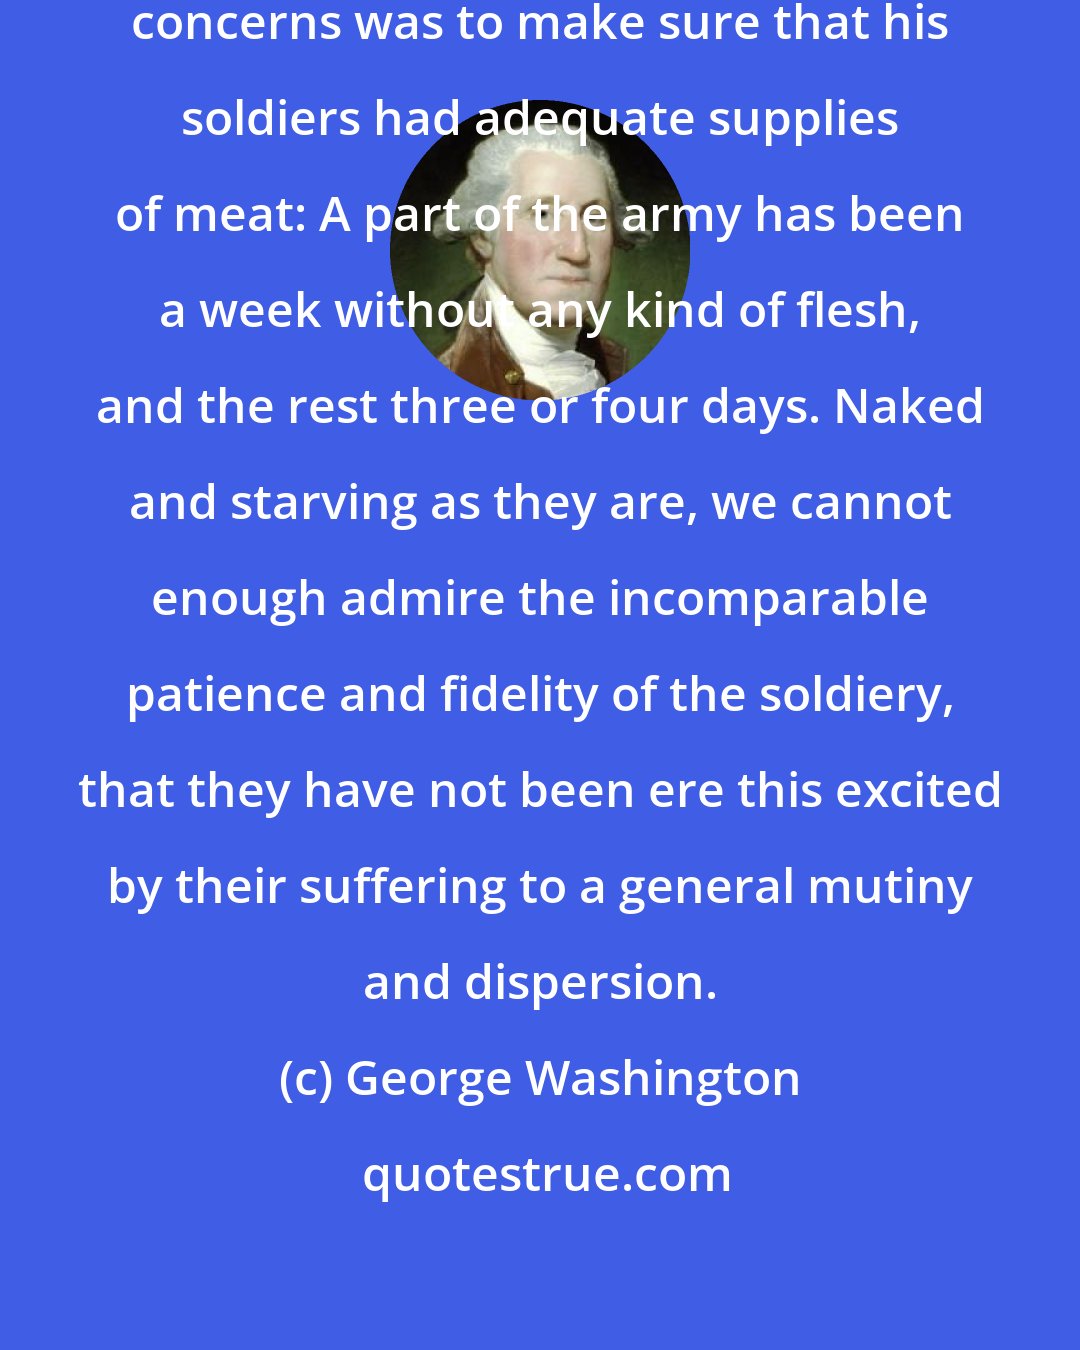 George Washington: One of George Washington's main concerns was to make sure that his soldiers had adequate supplies of meat: A part of the army has been a week without any kind of flesh, and the rest three or four days. Naked and starving as they are, we cannot enough admire the incomparable patience and fidelity of the soldiery, that they have not been ere this excited by their suffering to a general mutiny and dispersion.